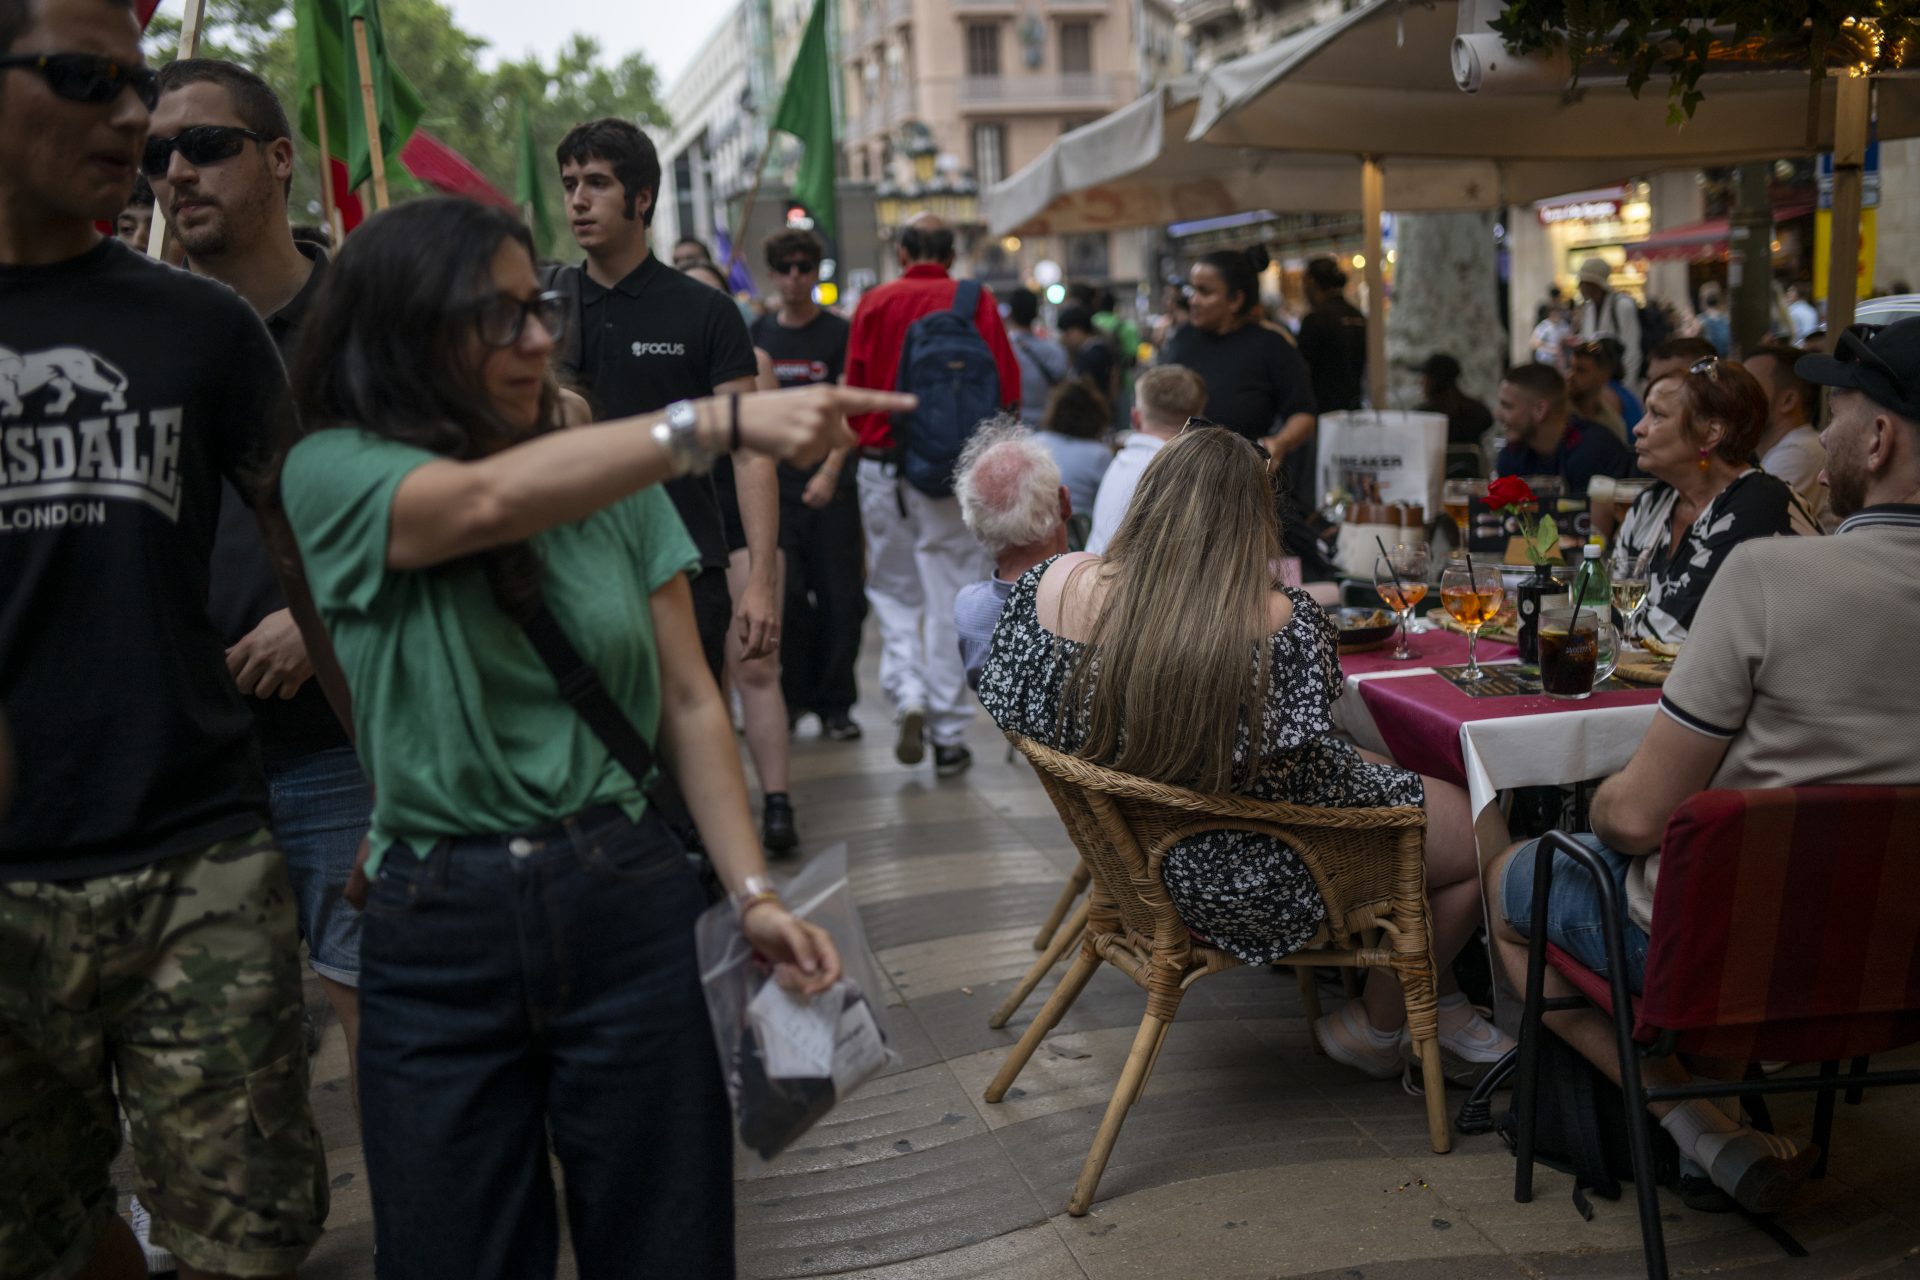 Over-tourism in Barcelona has made the locals angry